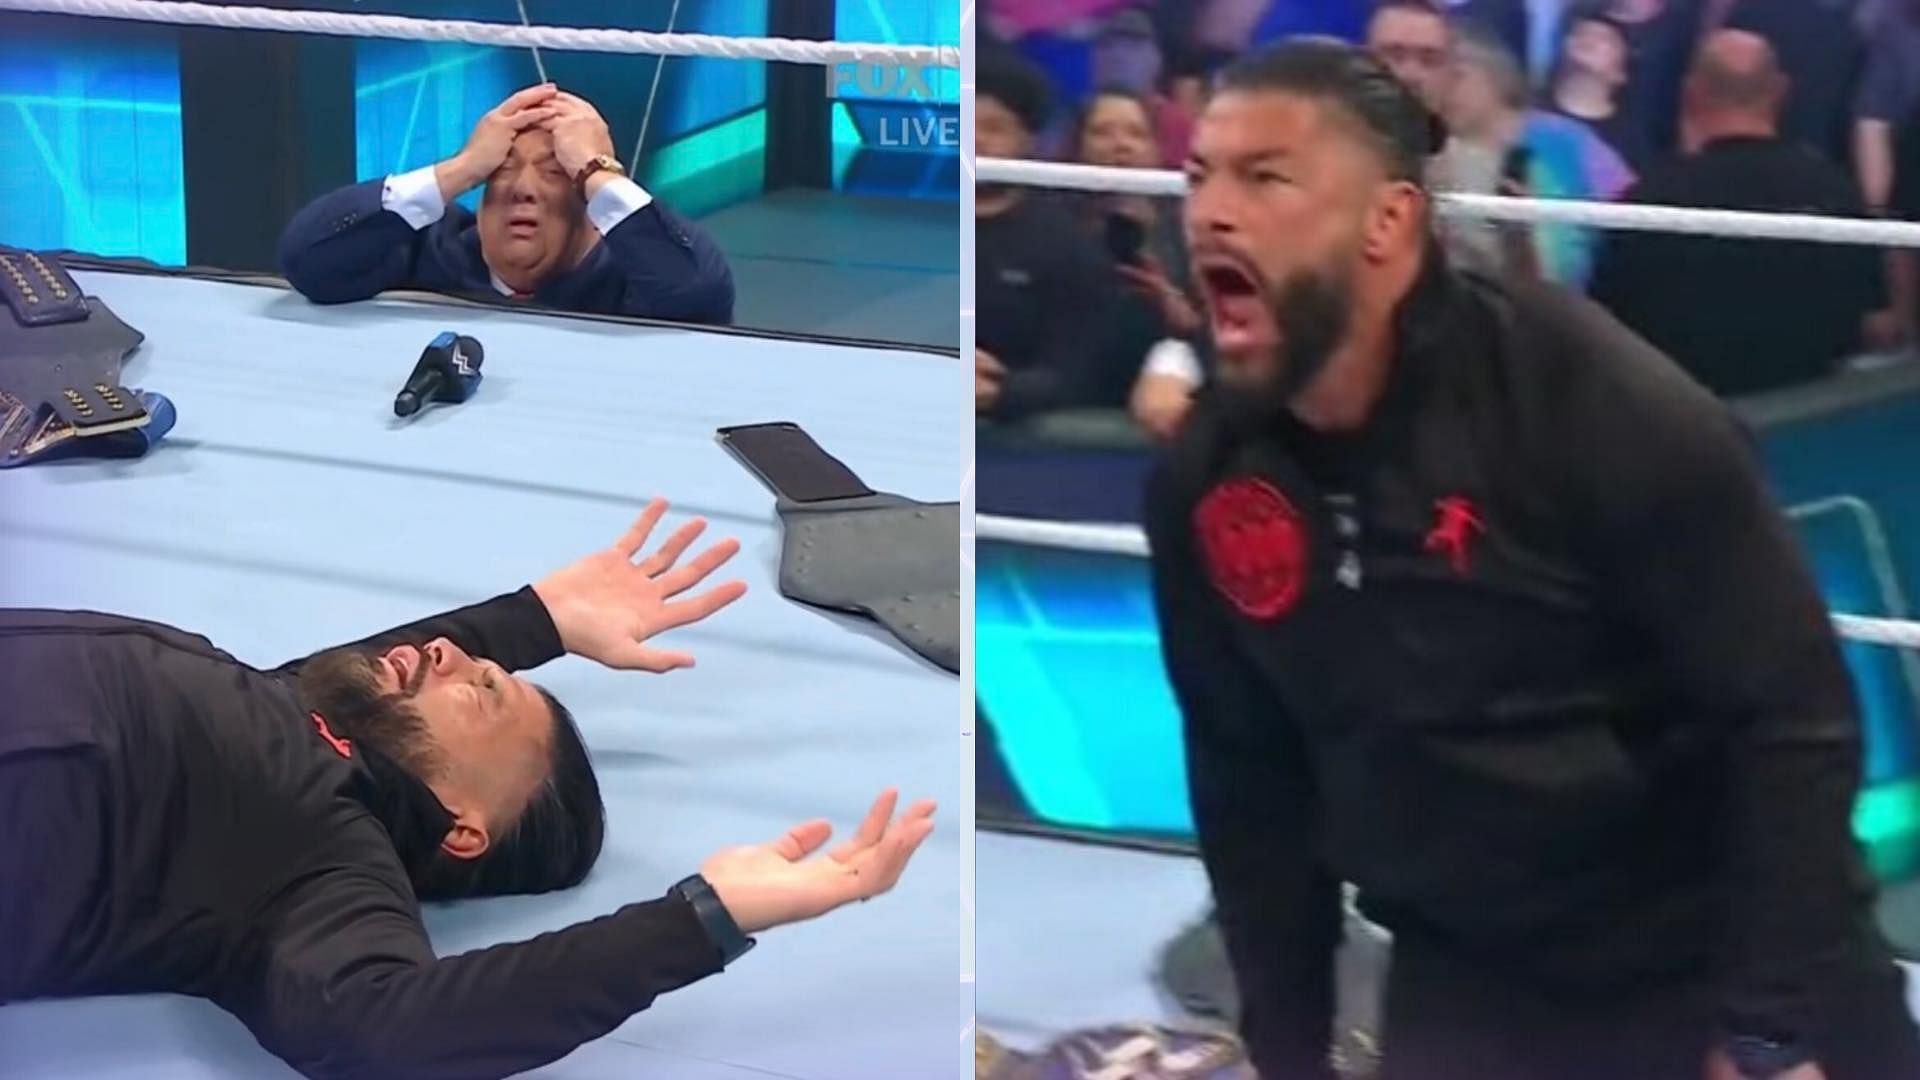 Roman Reigns suffered a major betrayal on WWE SmackDown.